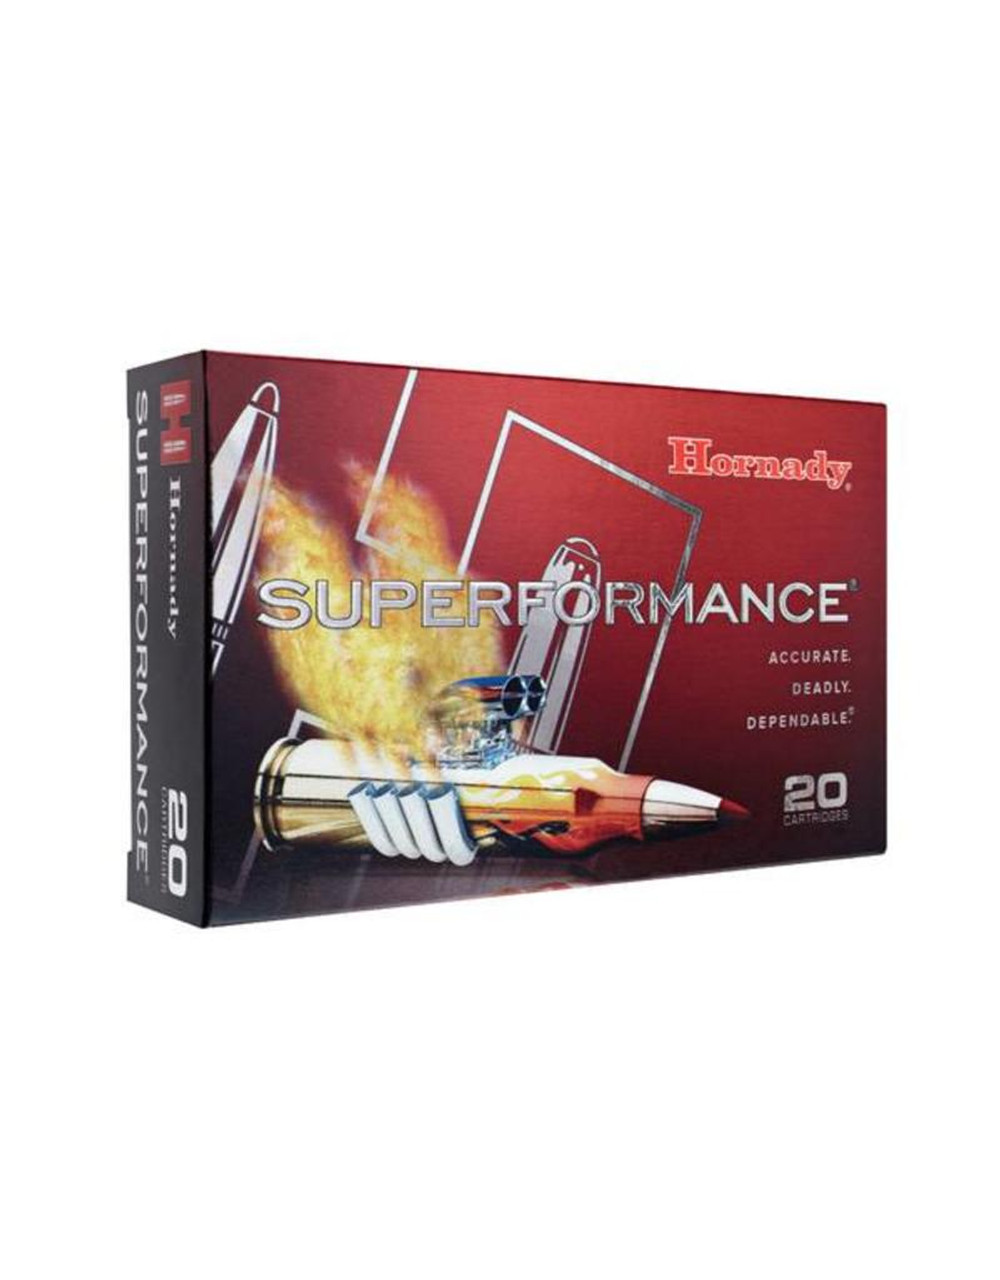 Hornady® SuperformanceTM Ammunition Shoots faster without a big-time recoil.

Add 100-200 f.p.s. to your shooting with Superformance® Ammo... works on every gun, and you won't even feel the difference! Using specialized powders, Superformance is able to use normal charge weights (more charge weight equals more f.p.s.... and more recoil) that impart all useable energy to the bullet. 

Cartridge: .35 Whelen Ammo
Bullet Weight (grain): 200
Bullet Style: SP (Soft Point)
Muzzle Velocity (FPS): 2,920
Muzzle Energy (ft. lbs.): 3,760